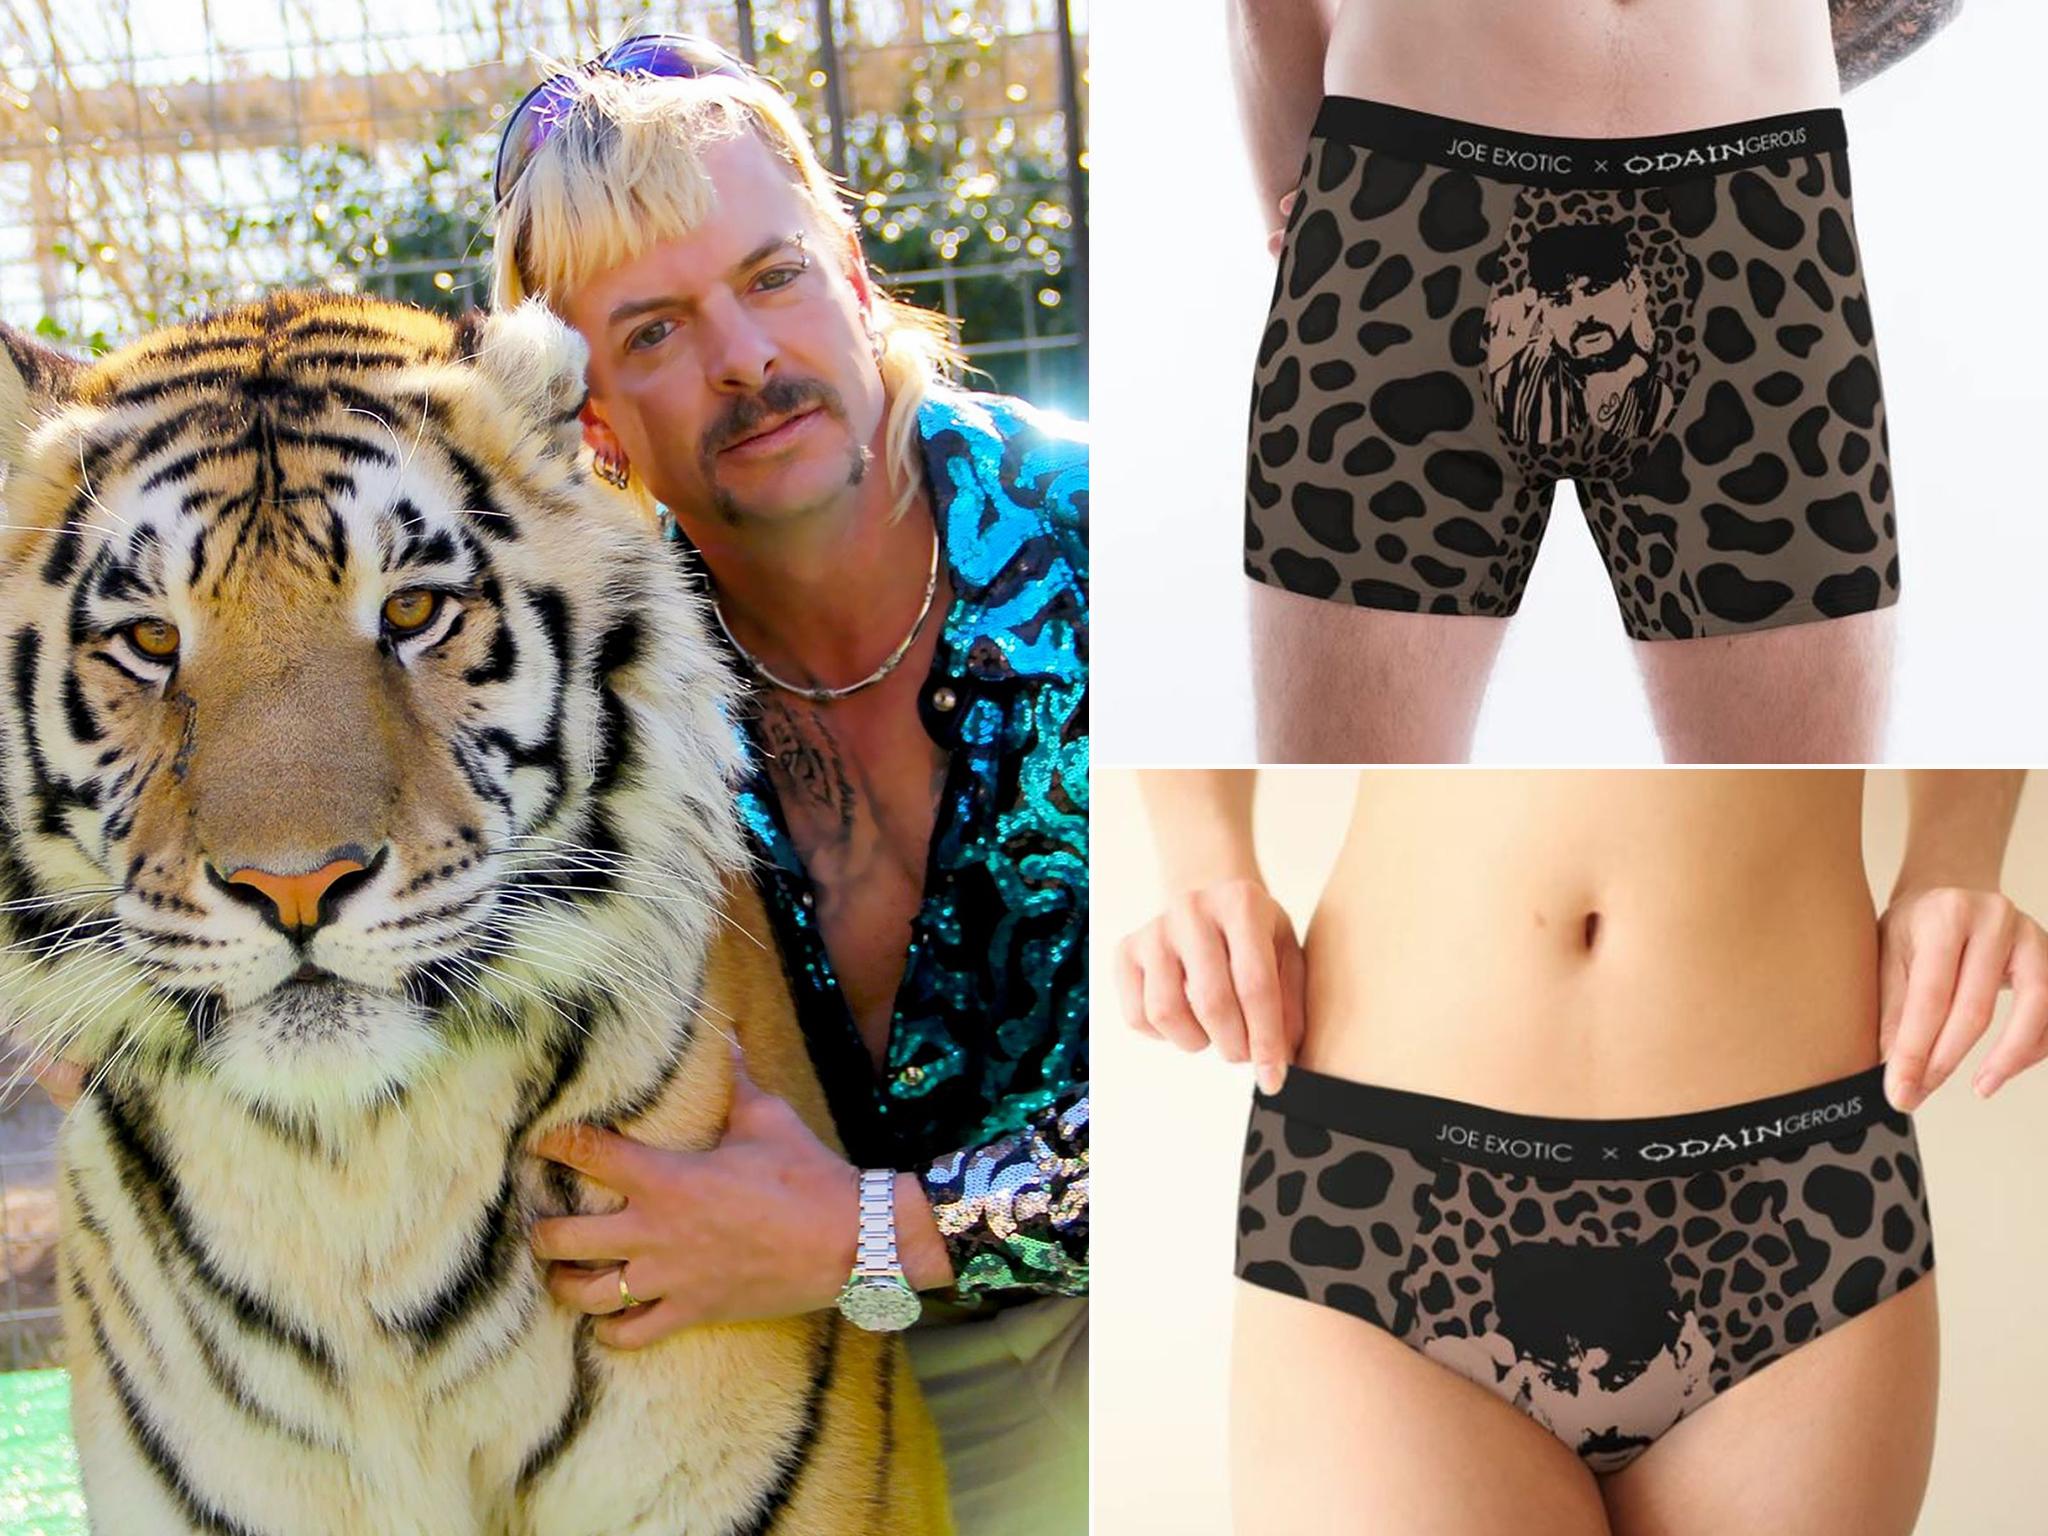 Joe Exotic releases 'Tiger King' underwear fronted by his face